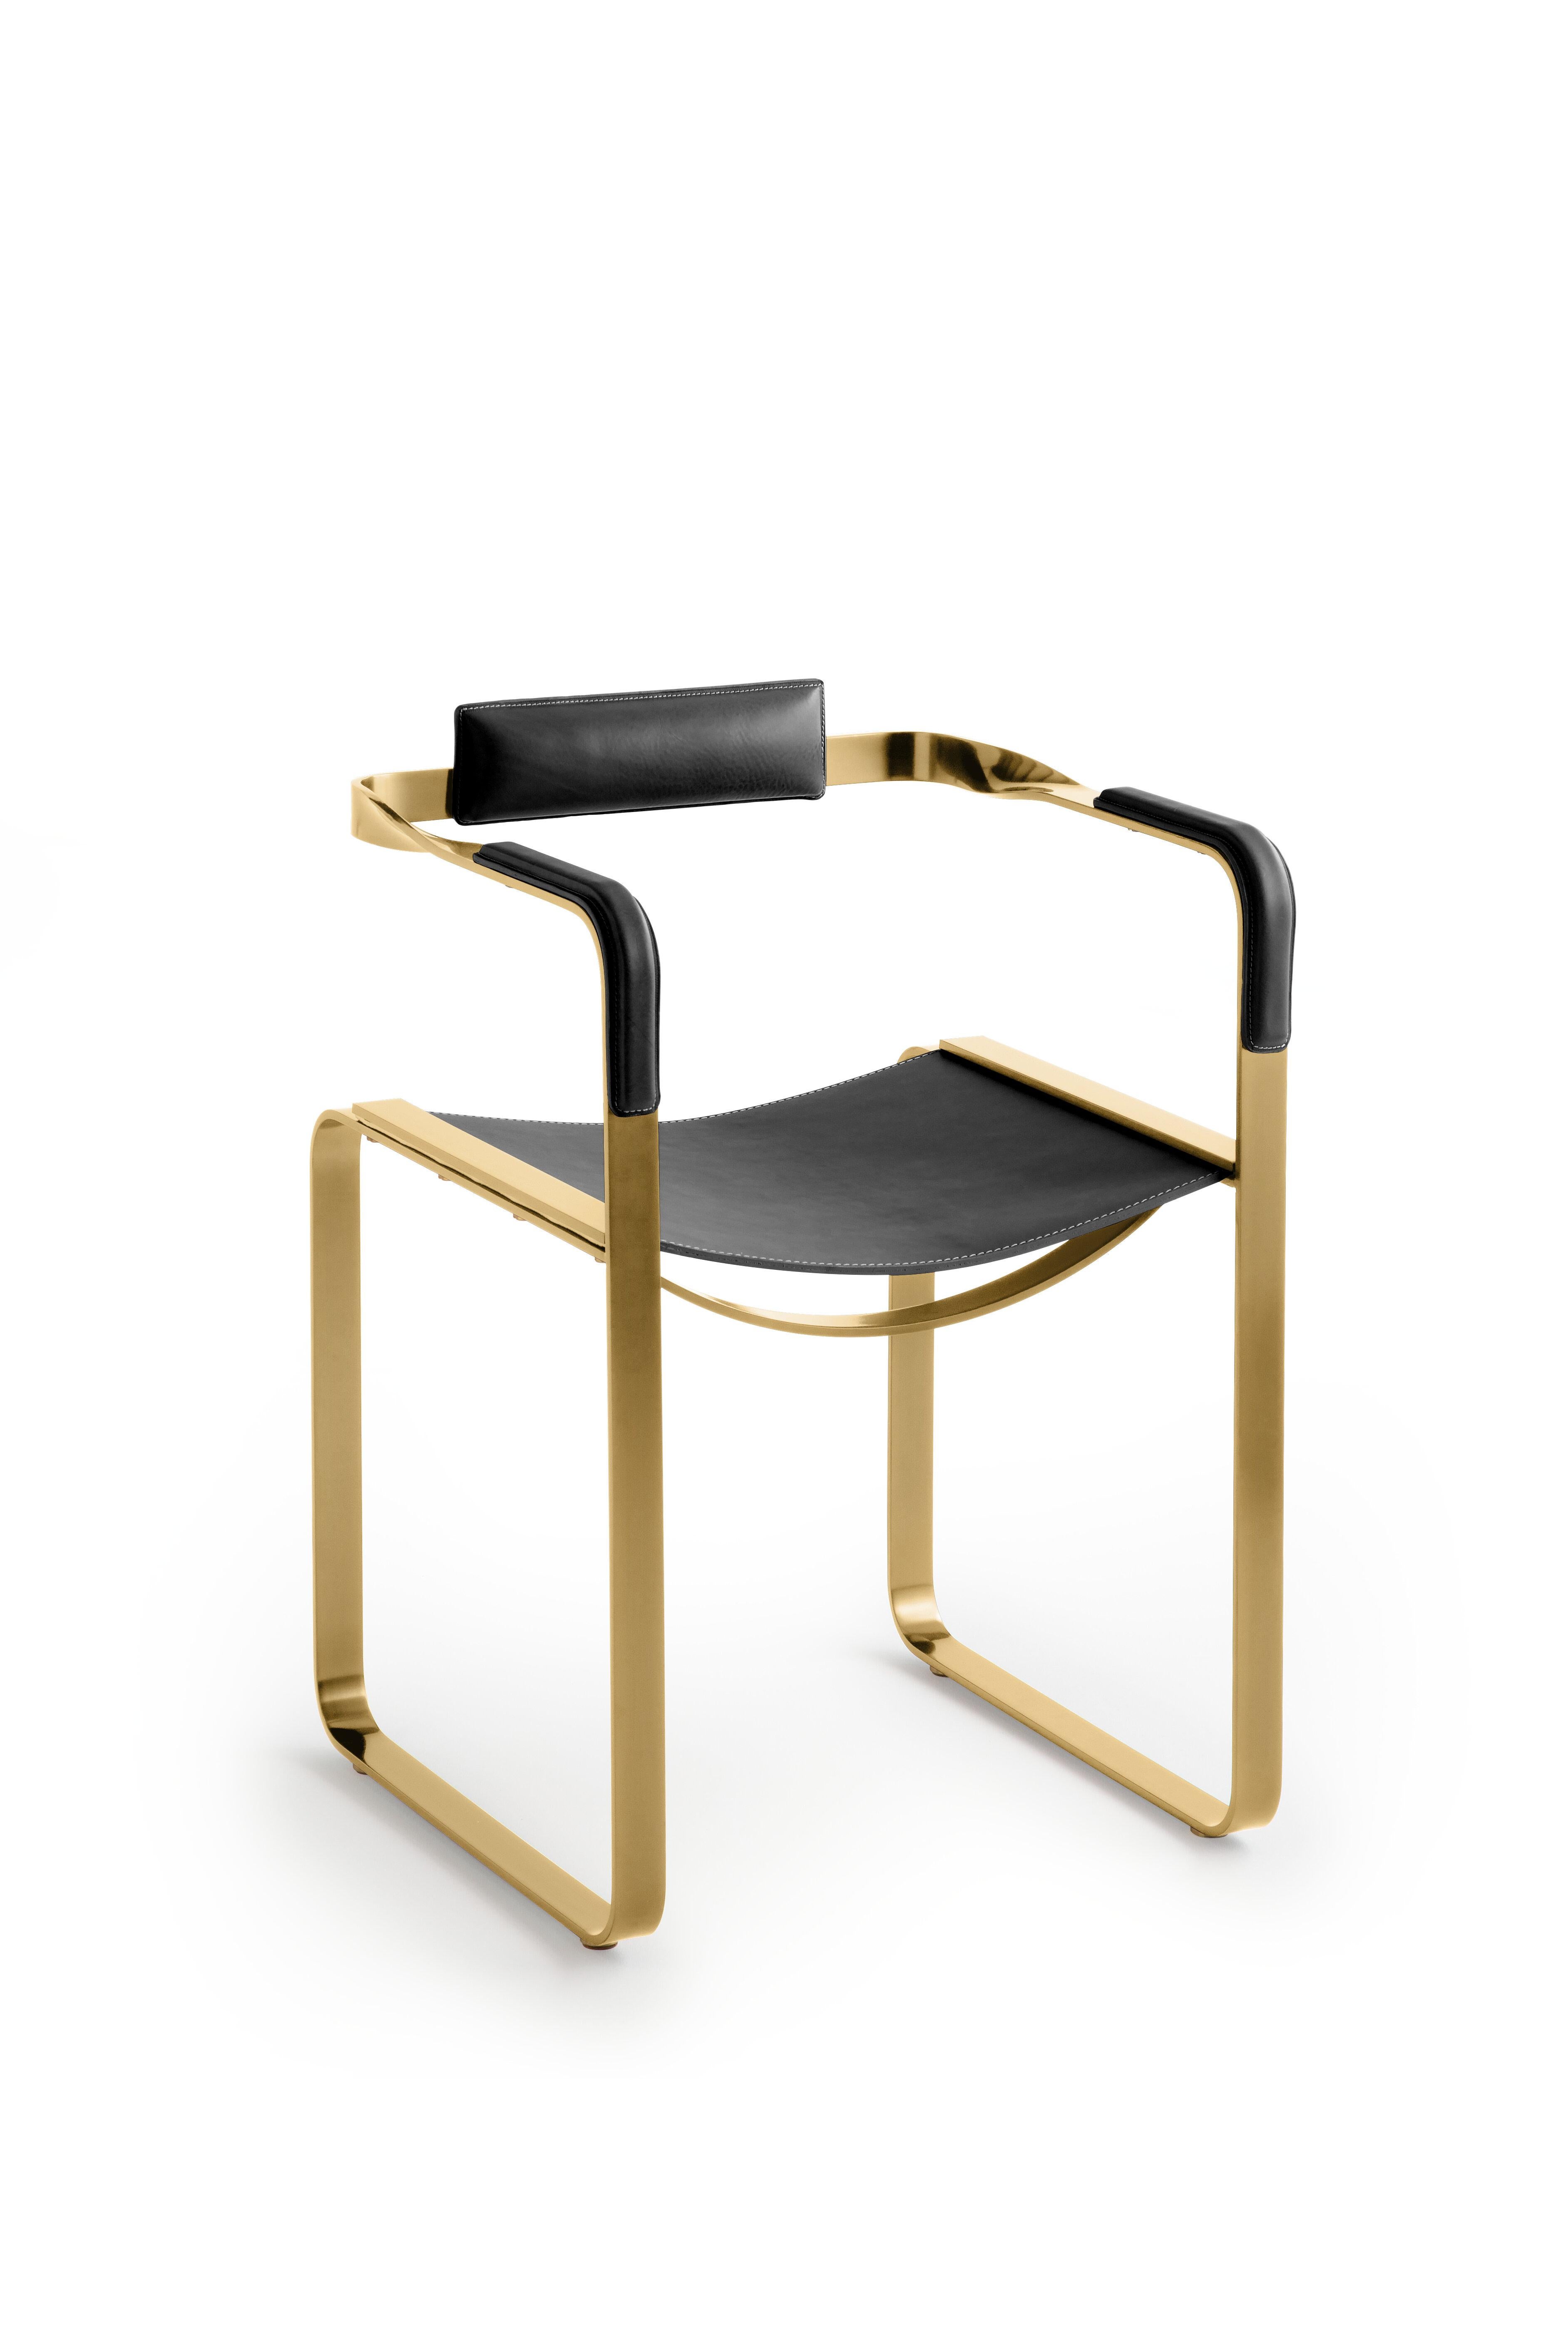 Armchair, Aged Brass Steel and Black Saddle Leather, Contemporary Style In New Condition For Sale In Alcoy, Alicante